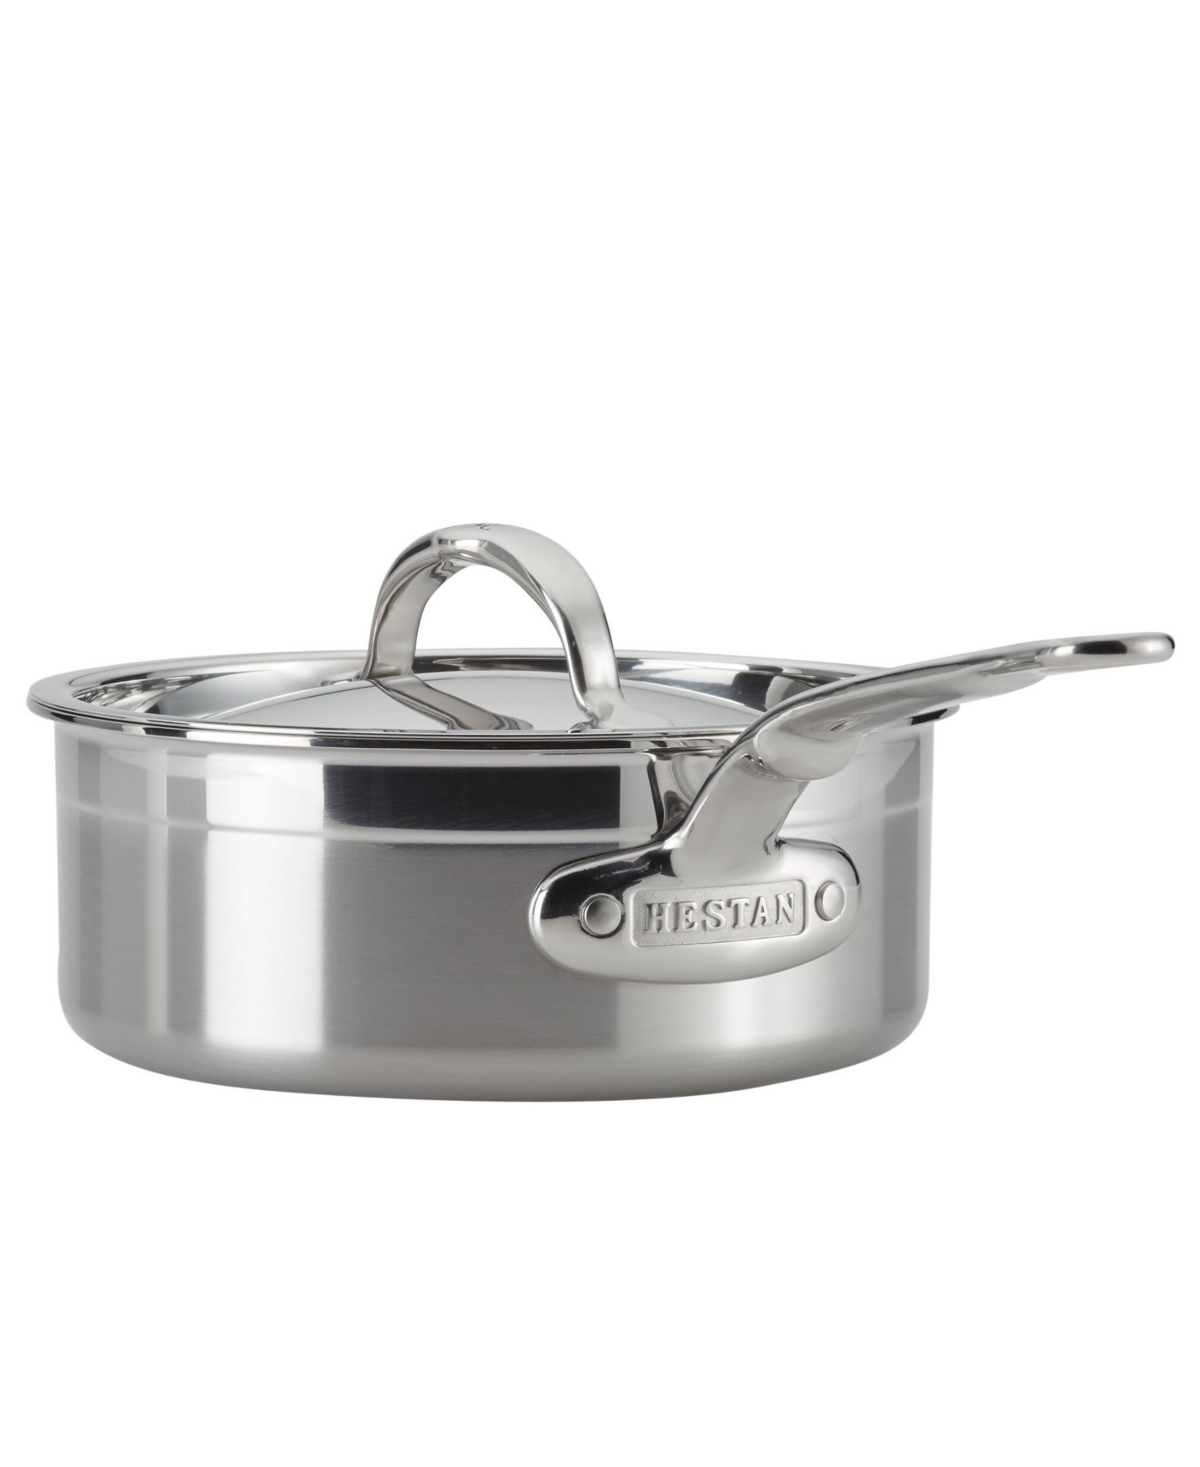 Shop Hestan Probond Clad Stainless Steel 2-quart Covered Saucepan In Silver